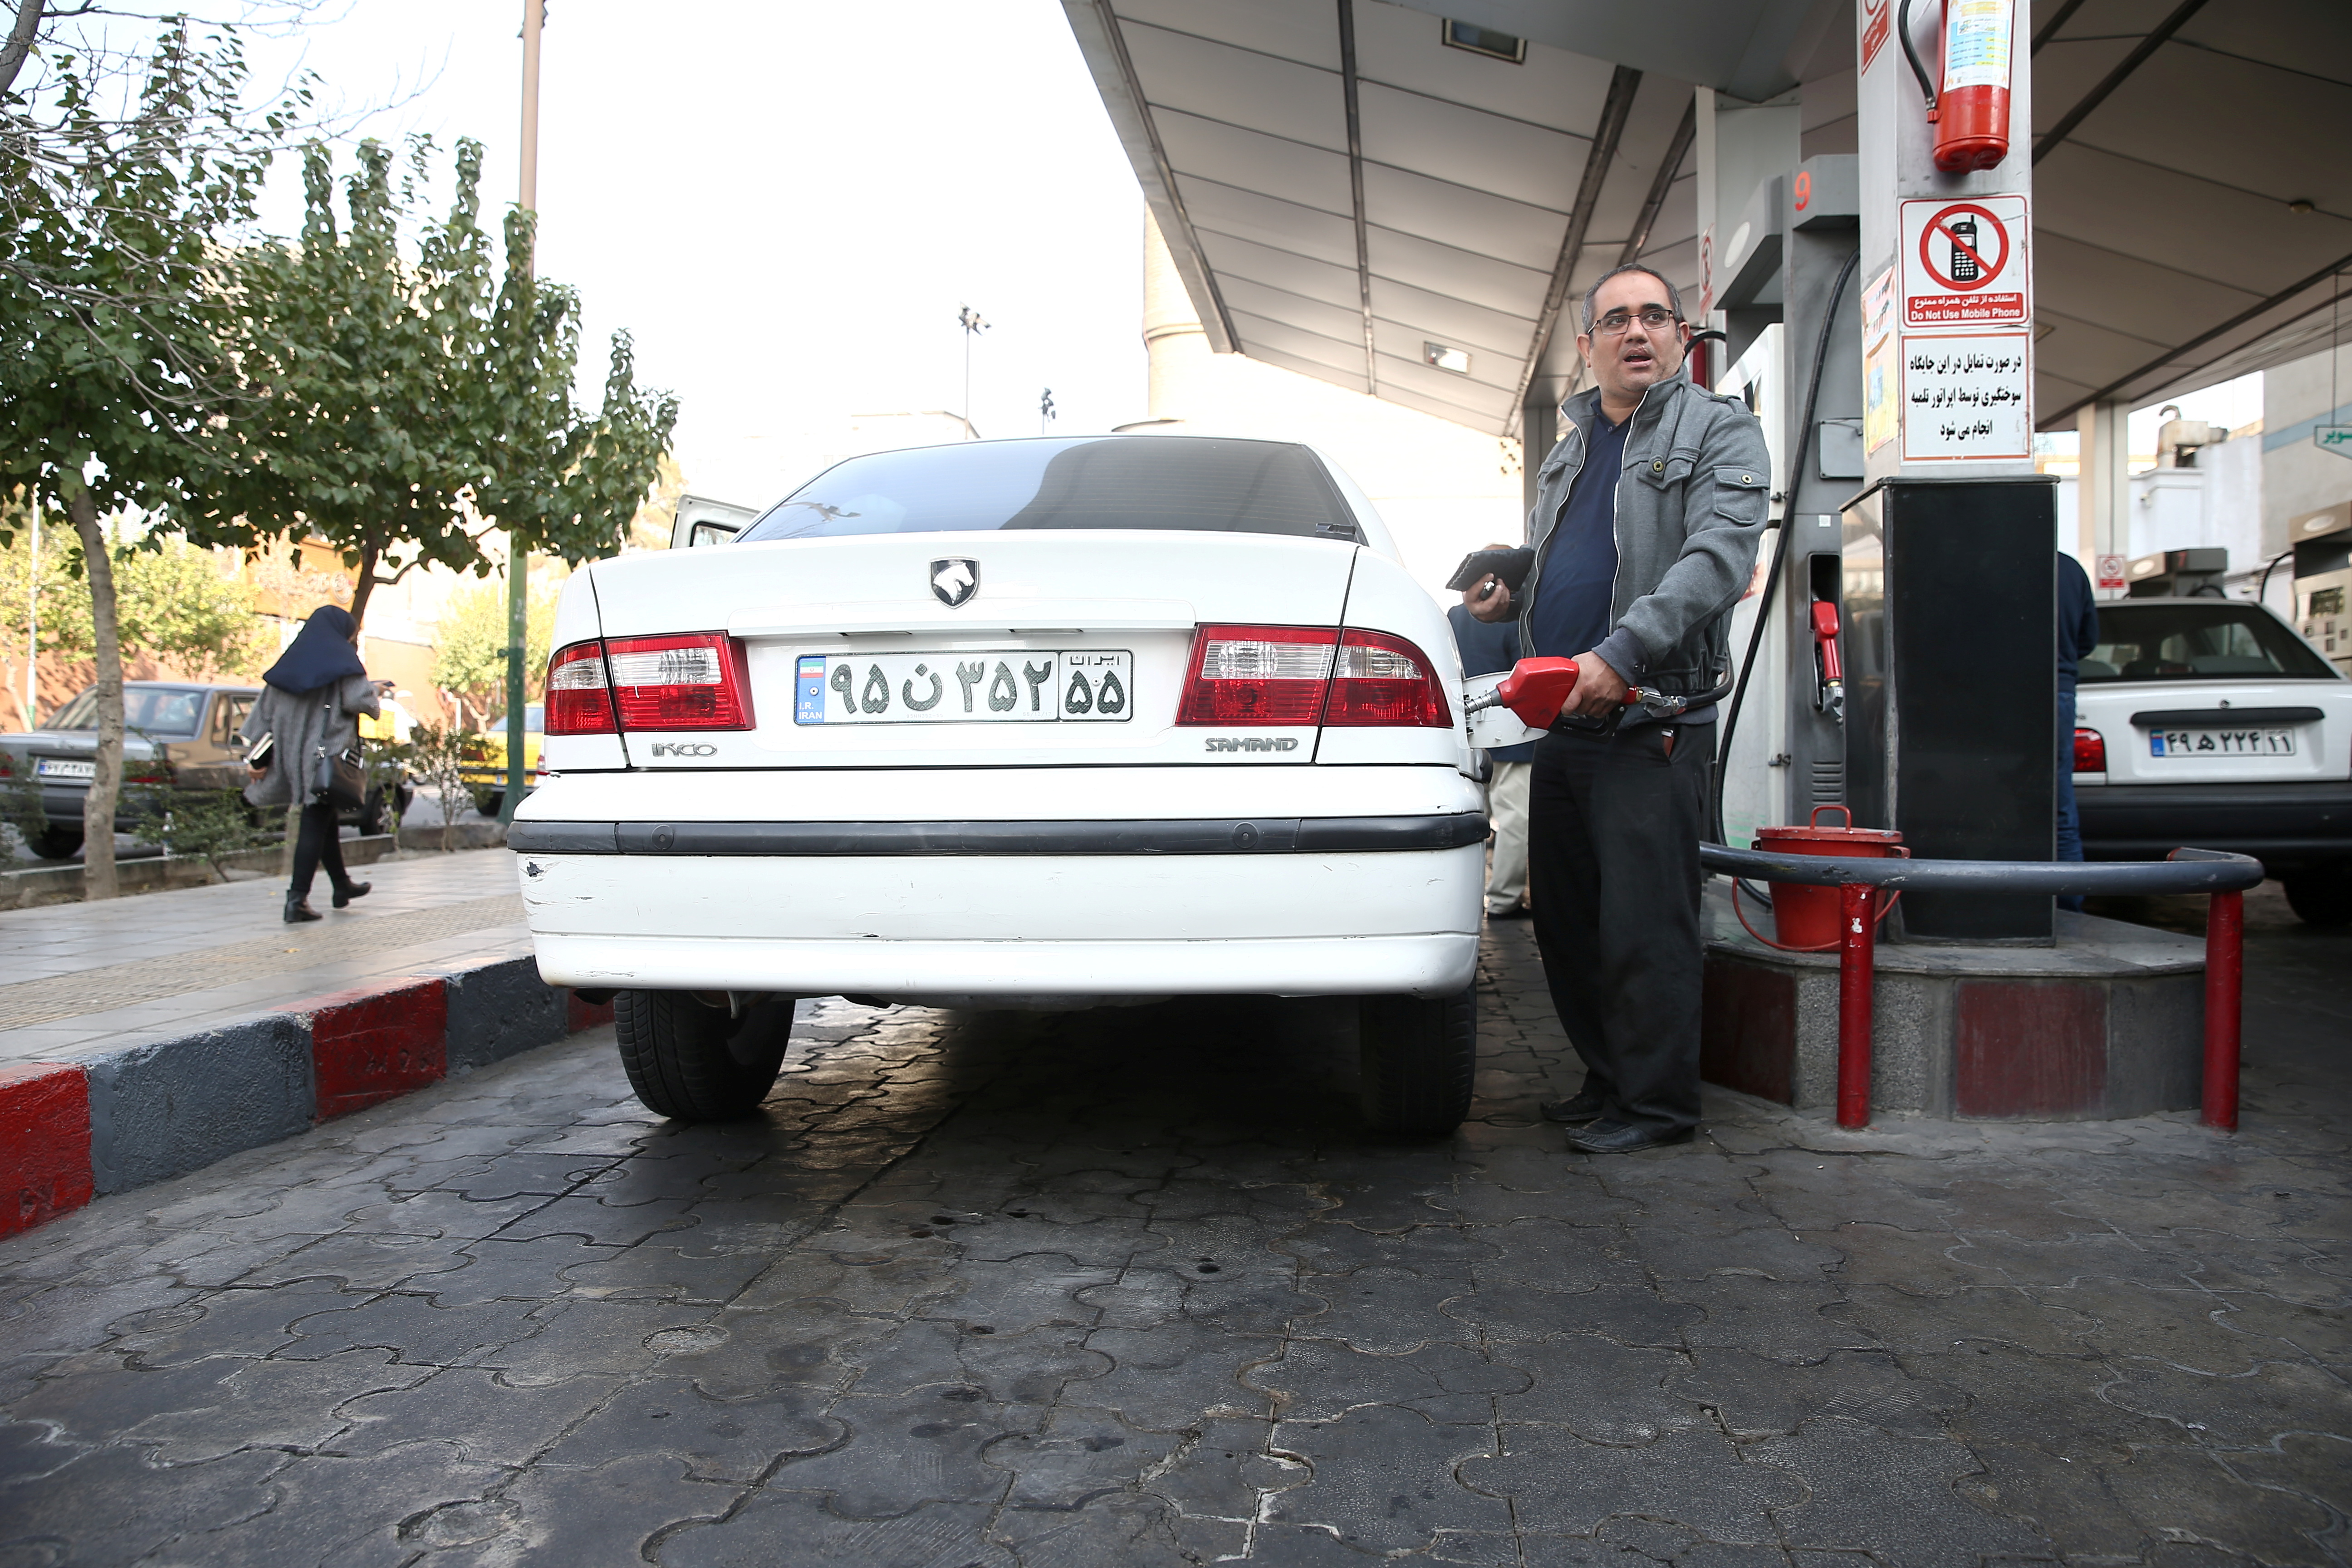 A man fills up his car's tank at a petrol station, after fuel price increased in Tehran, Iran November 15, 2019. Nazanin Tabatabaee/WANA (West Asia News Agency) via REUTERS